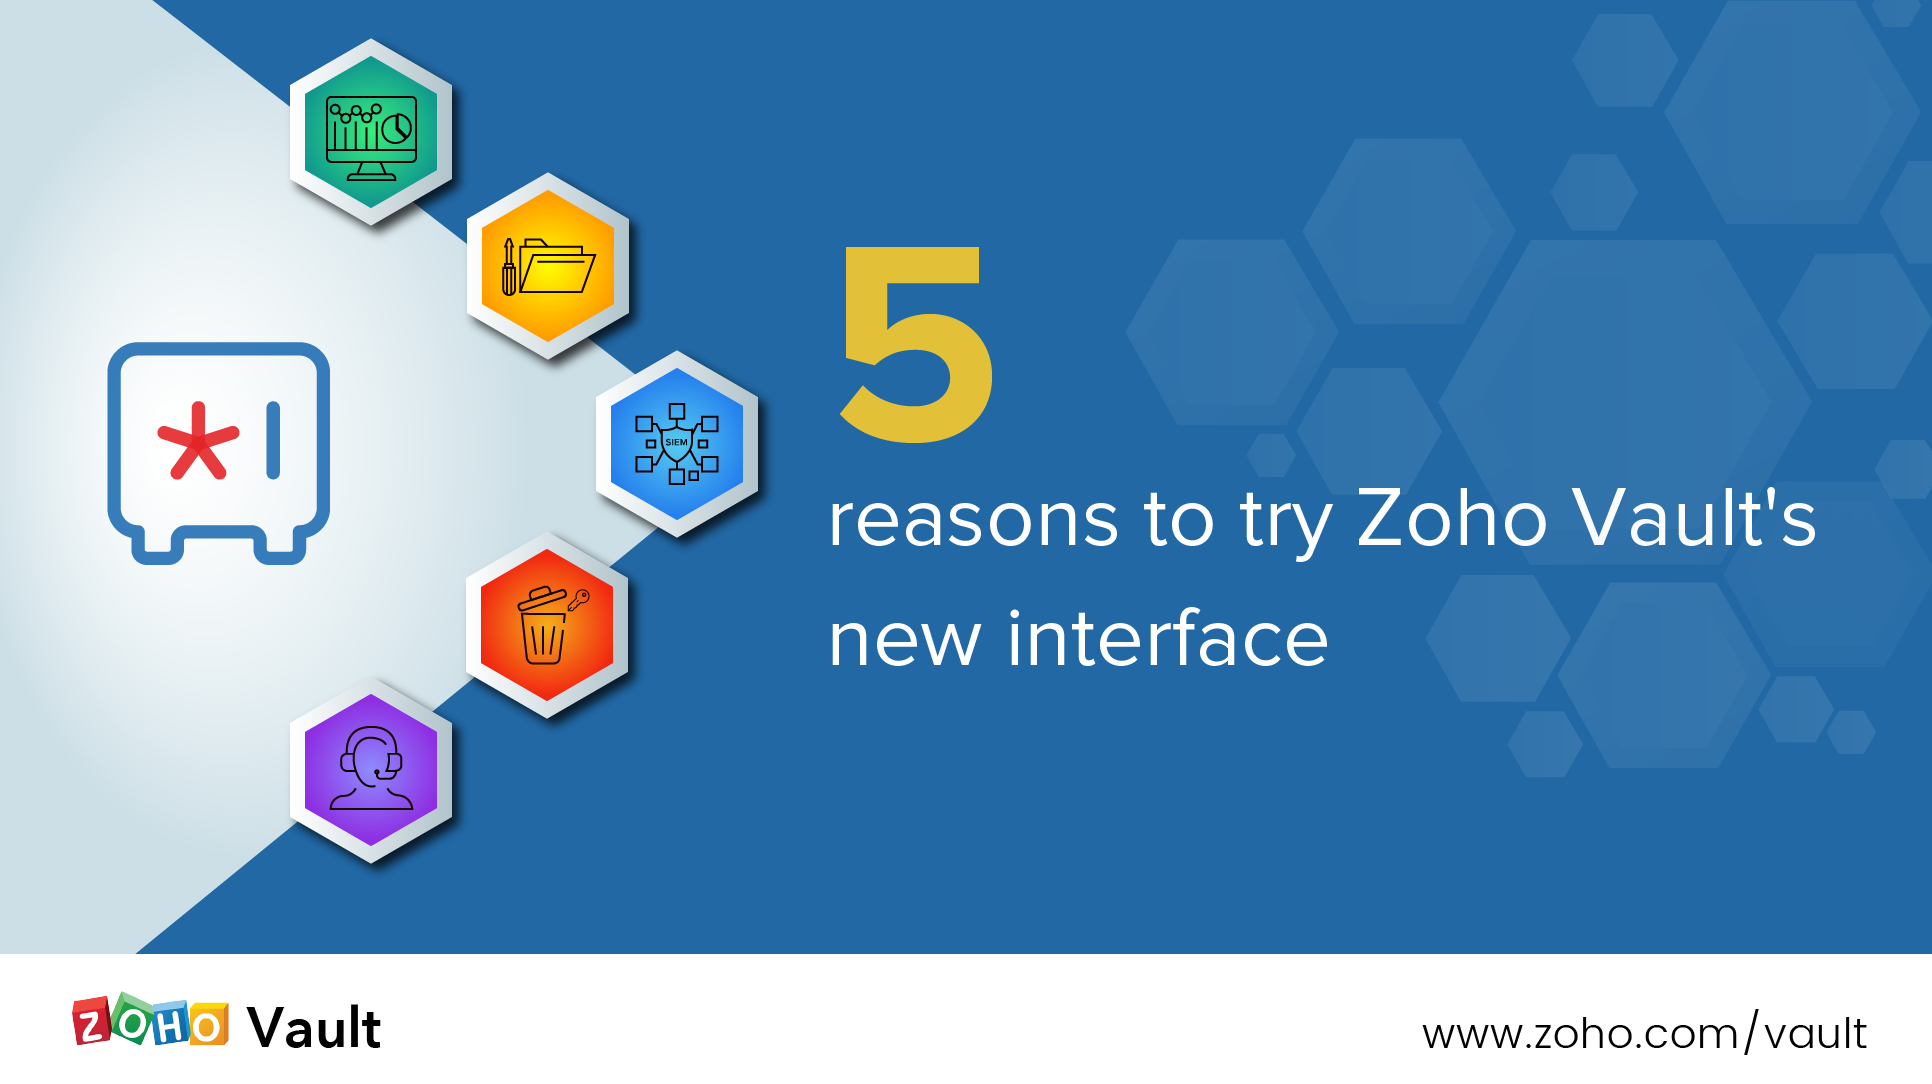 5 reasons to try Zoho Vault's new interface